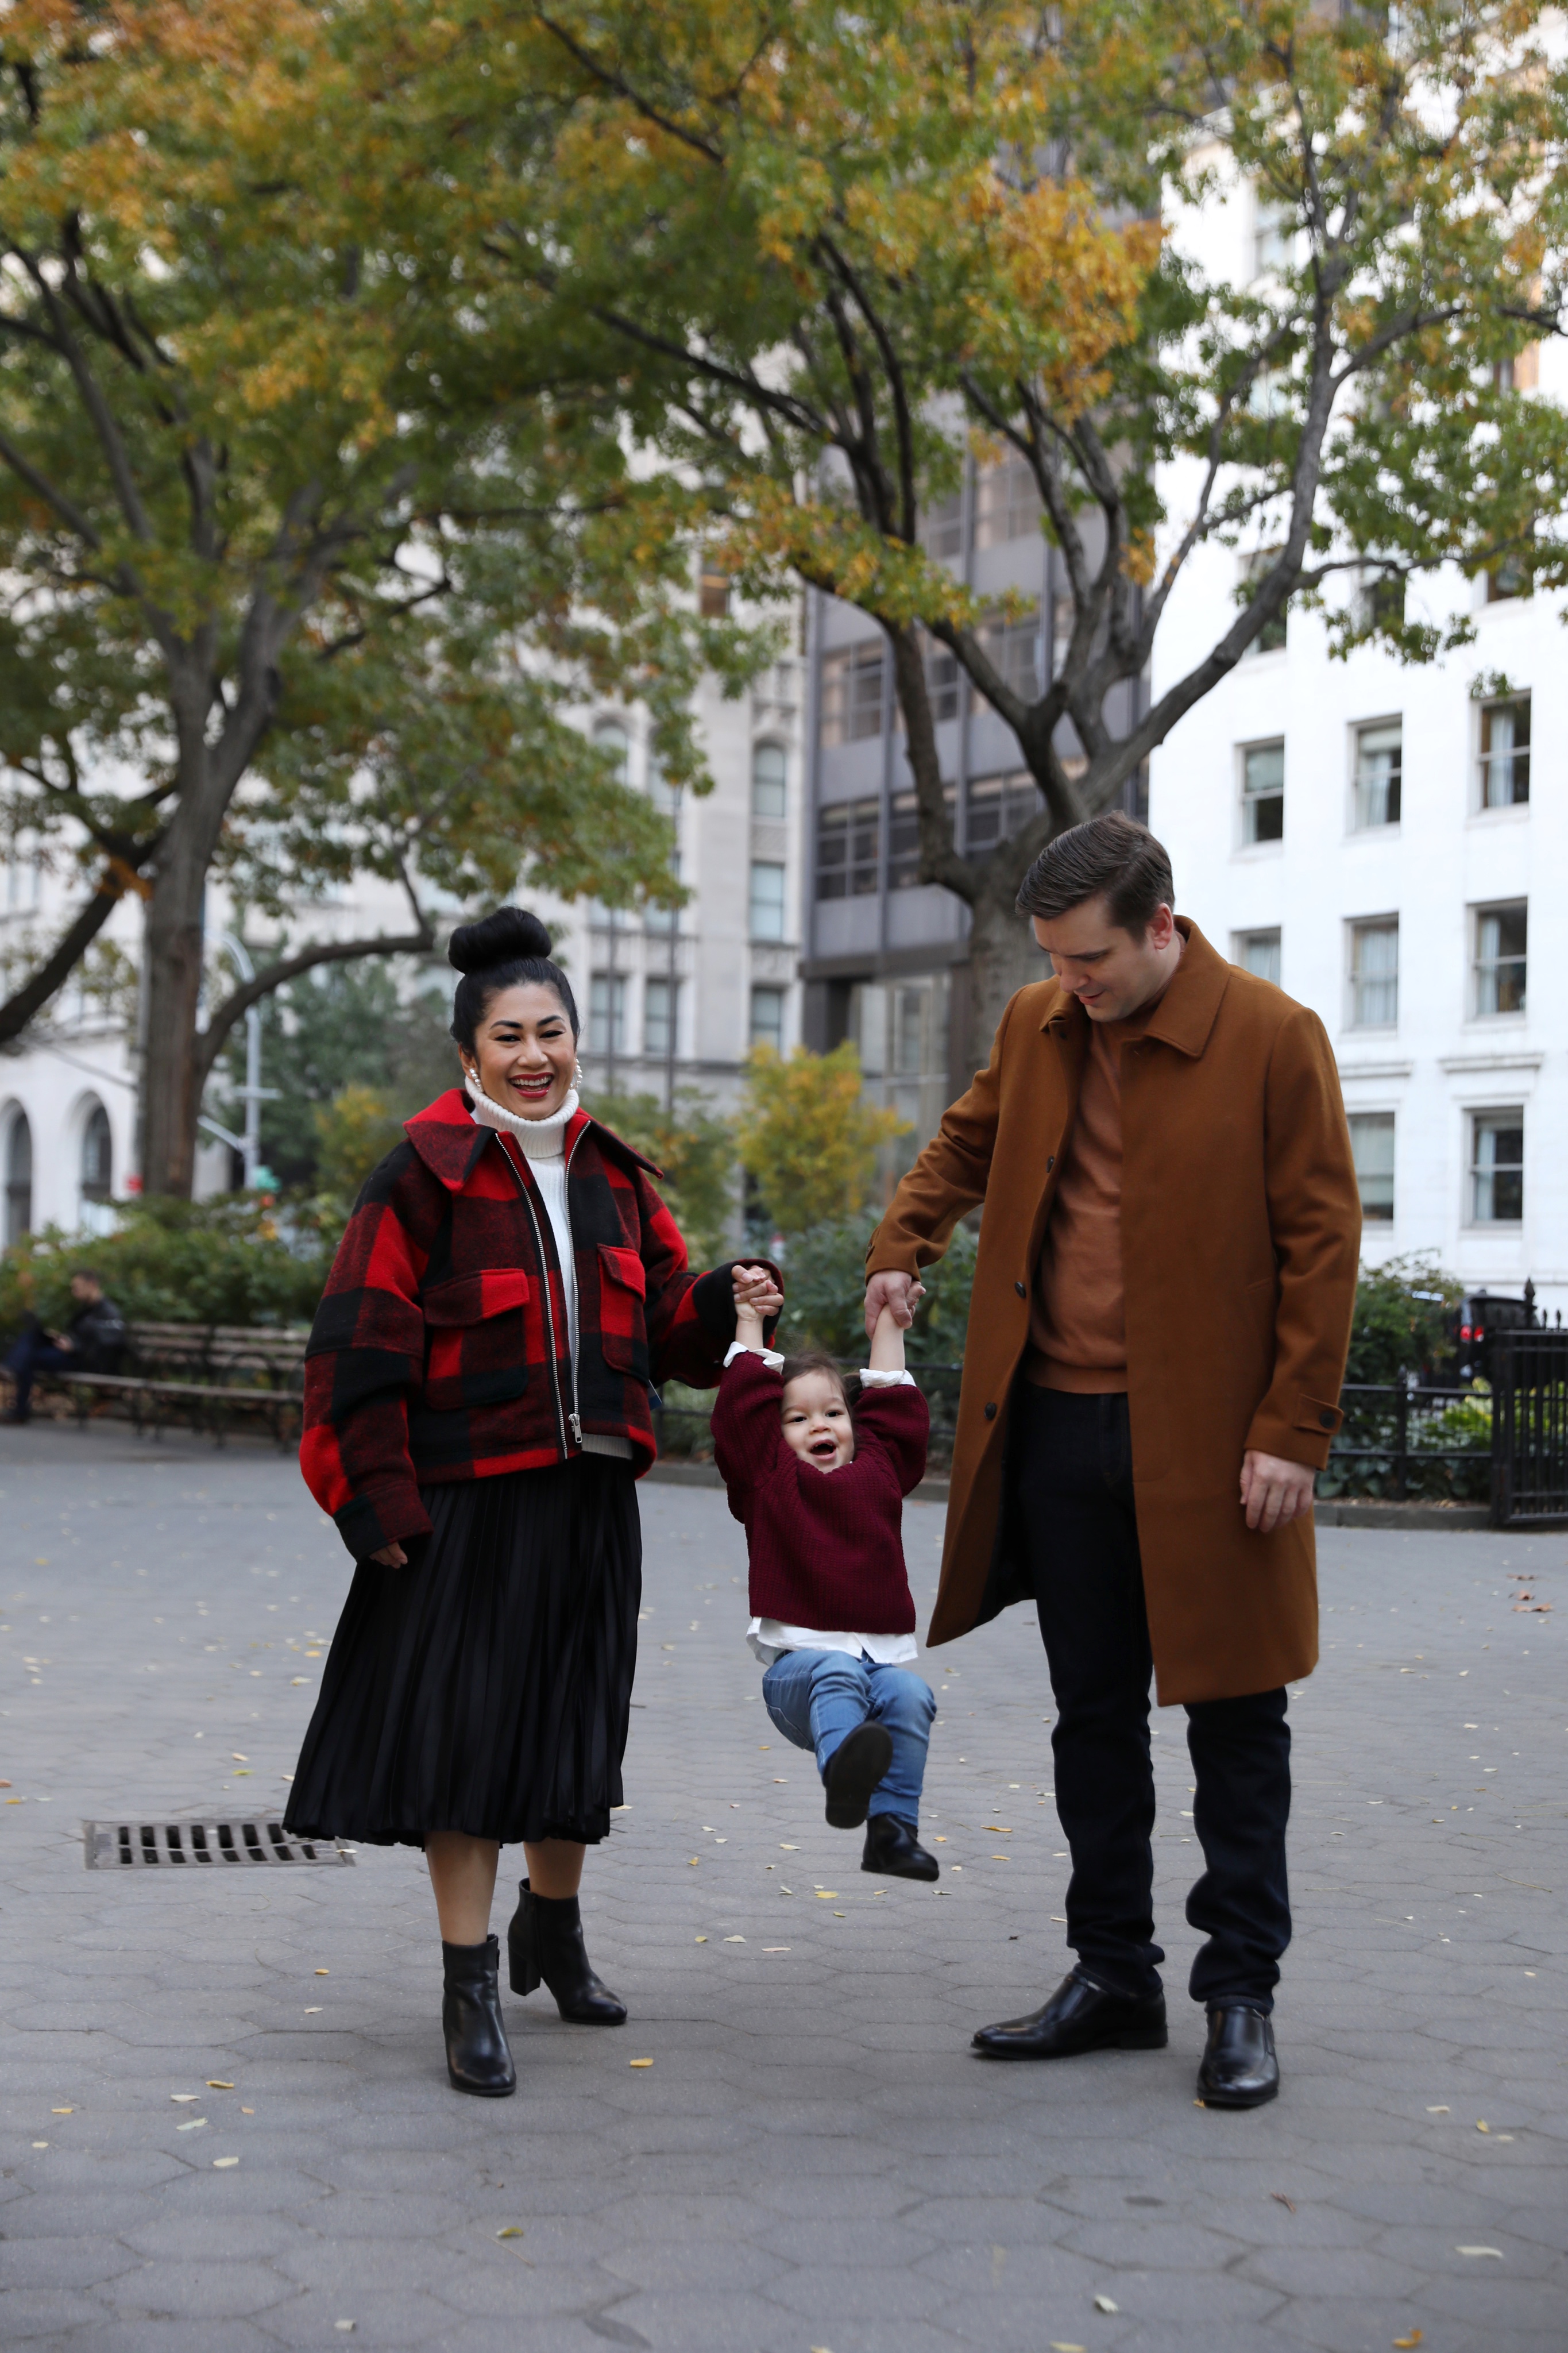 How to stay cozy while taking your family holiday photos